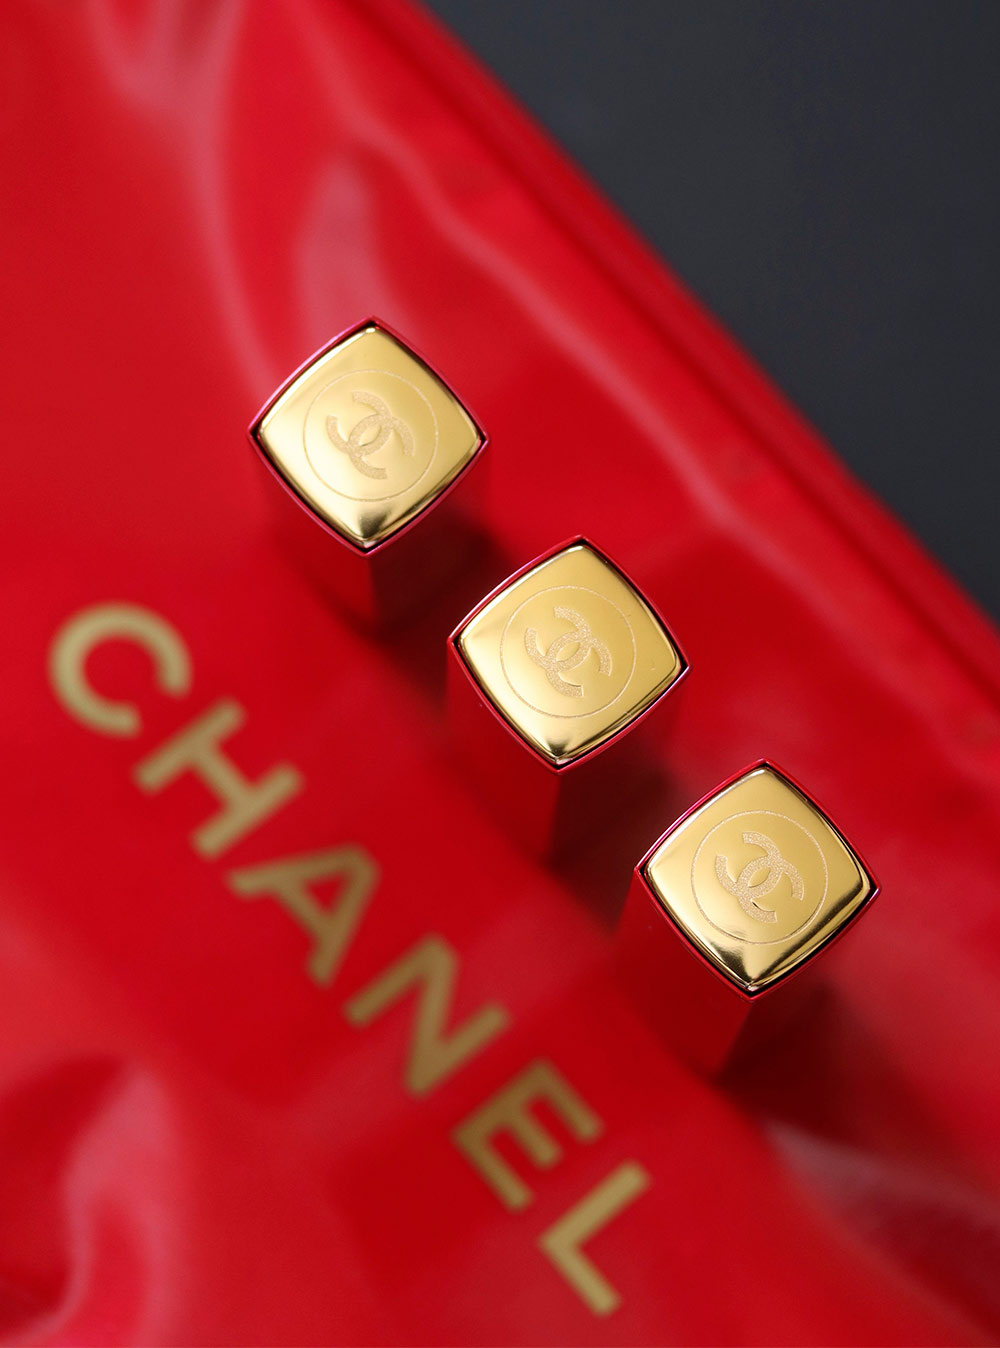 Chanel Holiday 2017: Rouge Allure and Rouge Allure Velvet